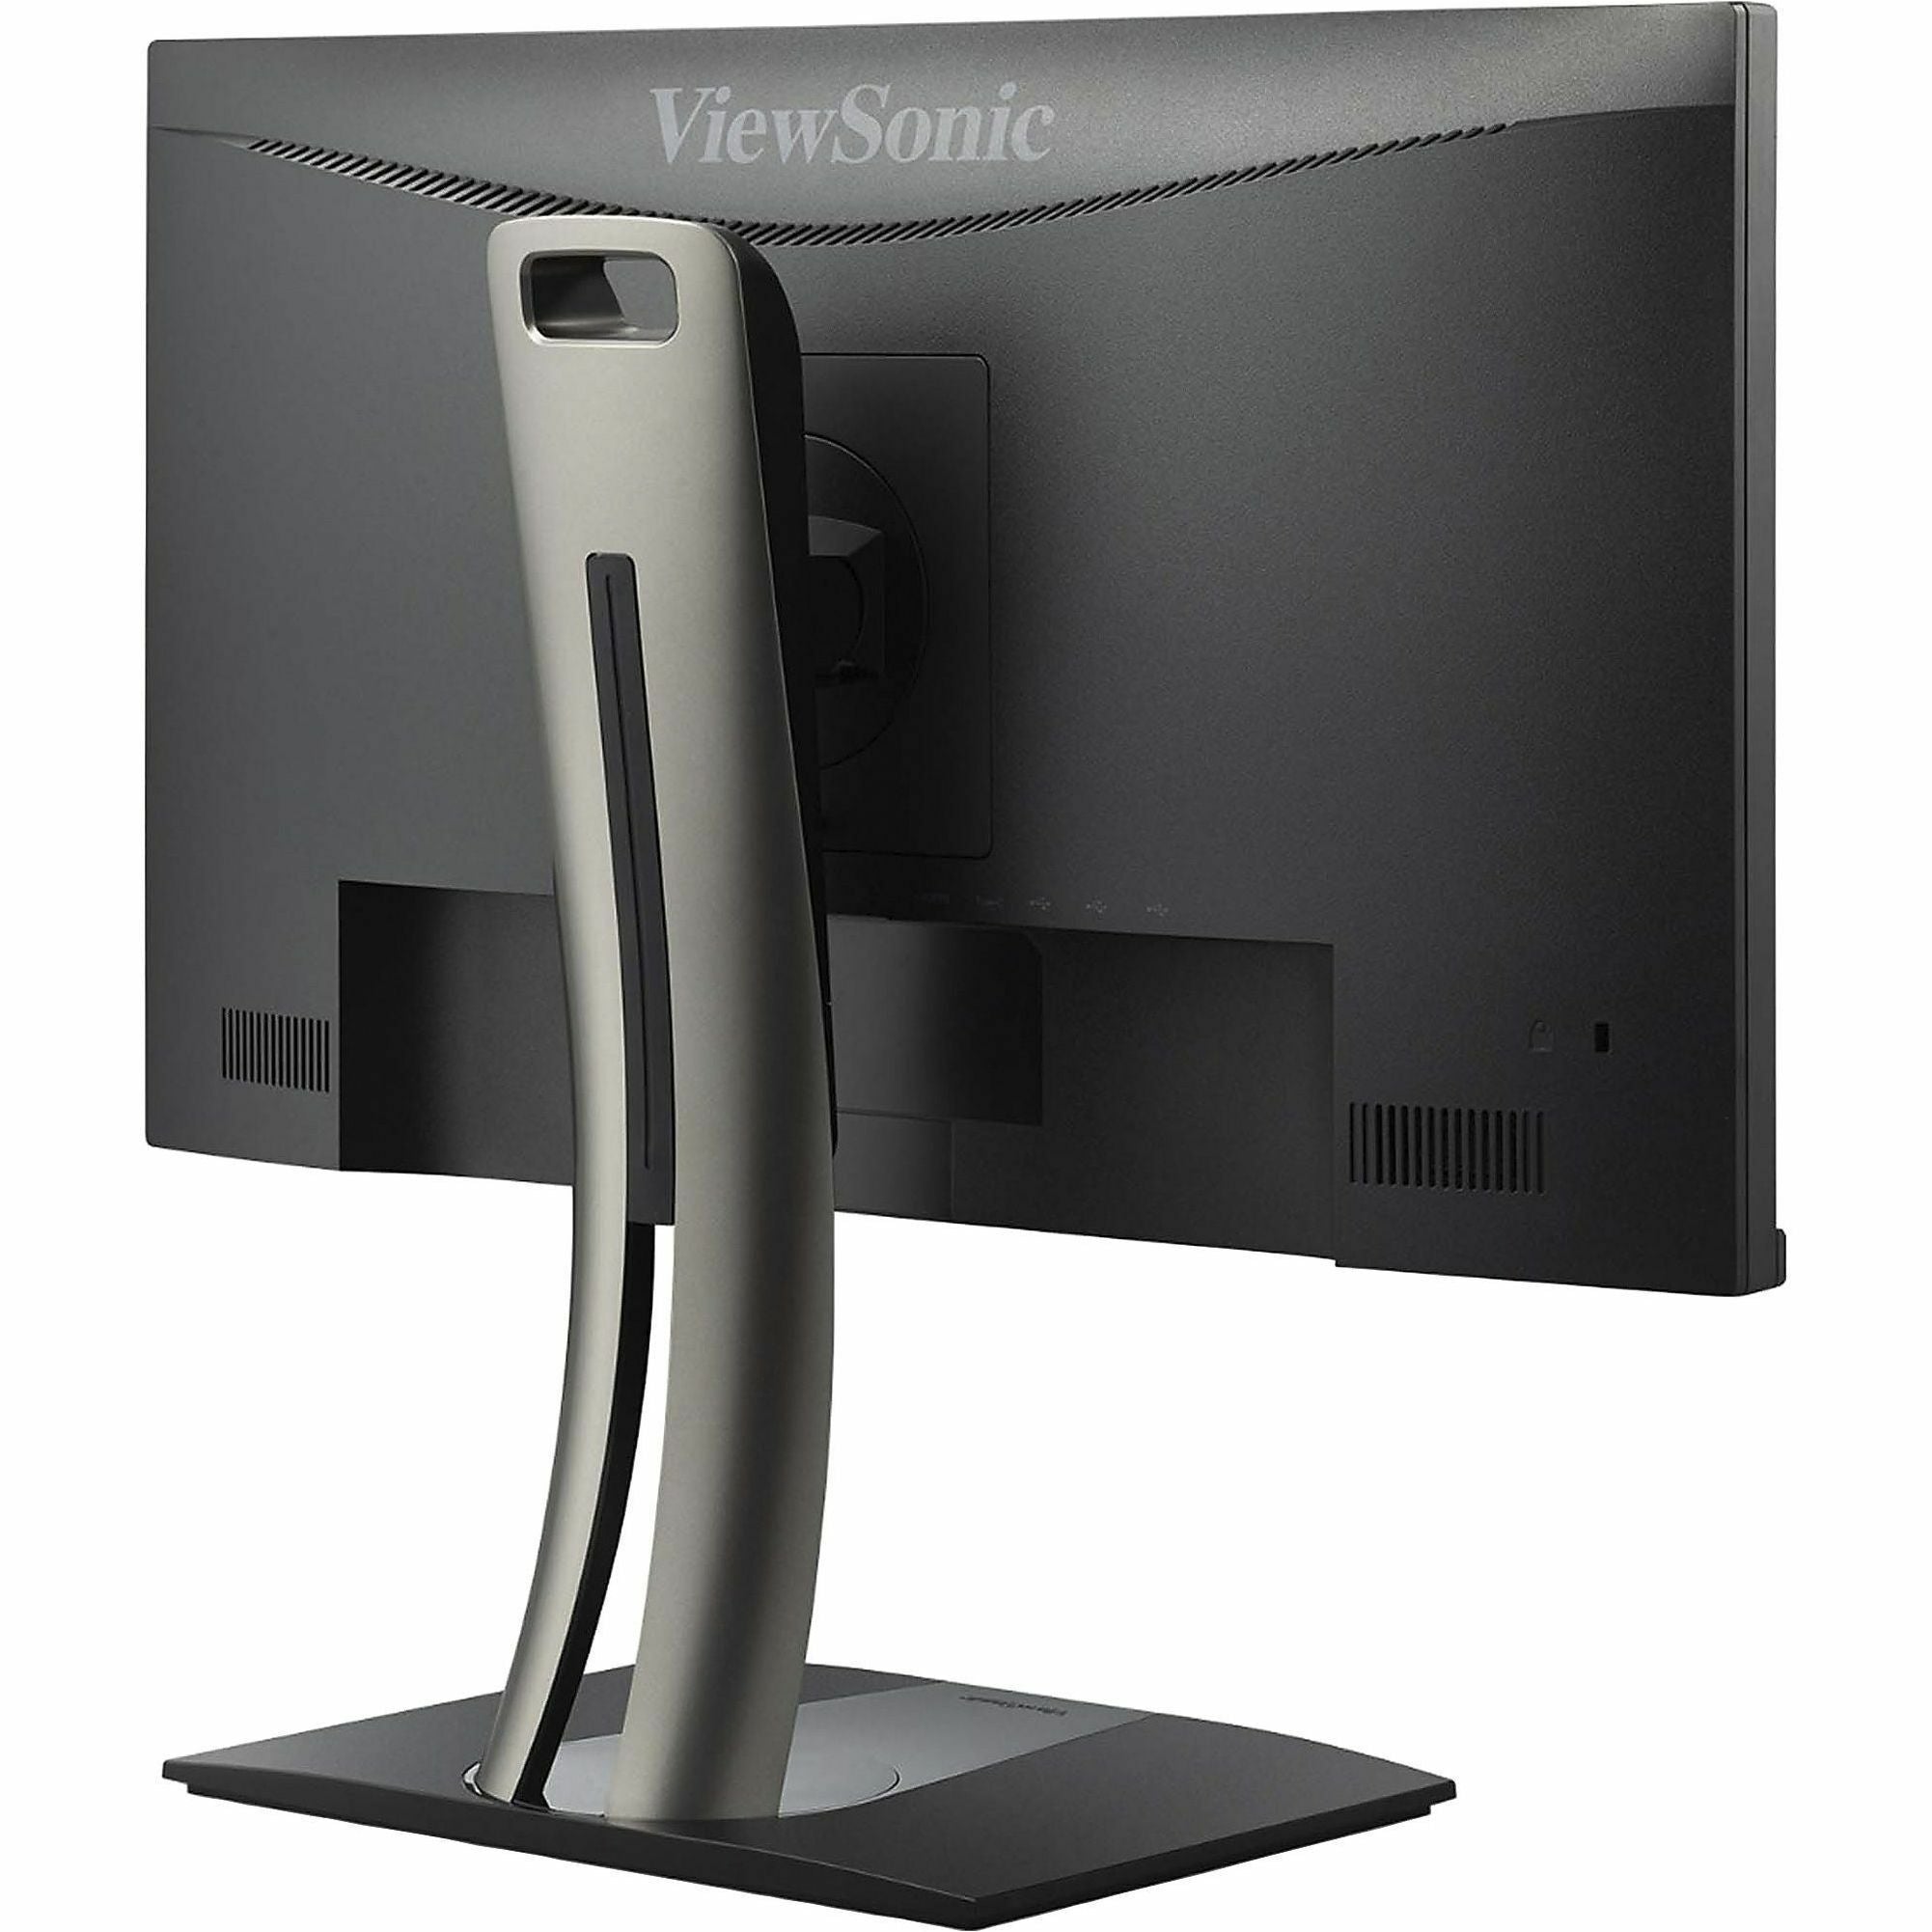 ViewSonic VP2456 24 Inch 1080p Premium IPS Monitor with Ultra-Thin Bezels, Color Accuracy, Pantone Validated, HDMI, DisplayPort and USB C for Professional Home and Office - ColorPro VP2456 - 1080p Ergonomic IPS Monitor with Pantone Validated, USB-C, - 2